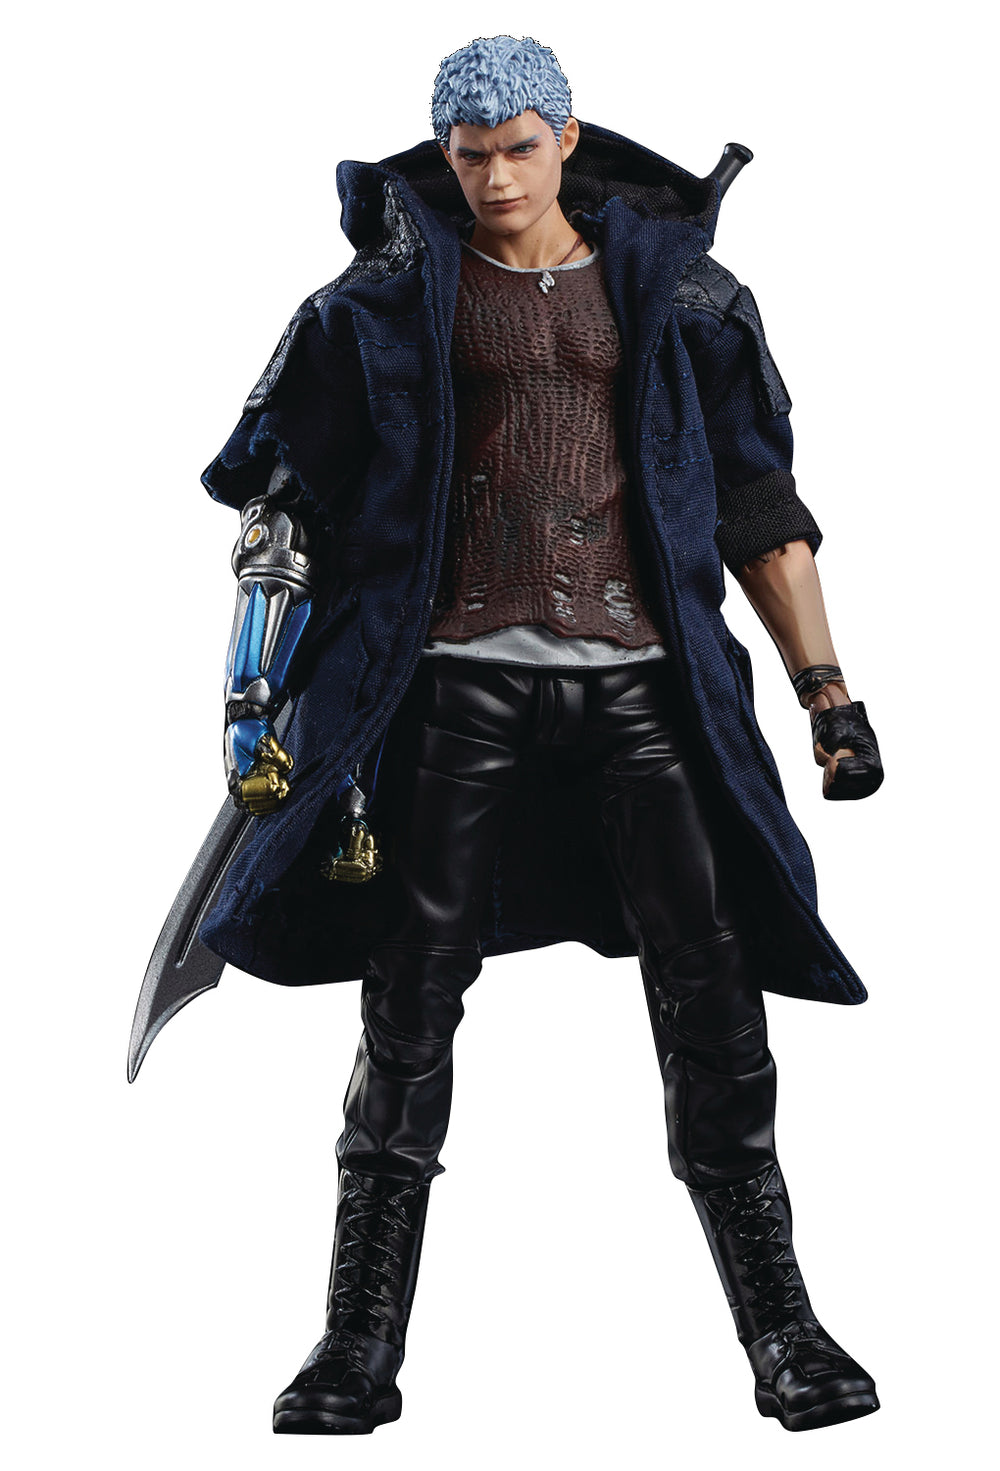 DEVIL MAY CRY 5 NERO PX DELUXE VERSION 1/12 SCALE ACTION FIGURE